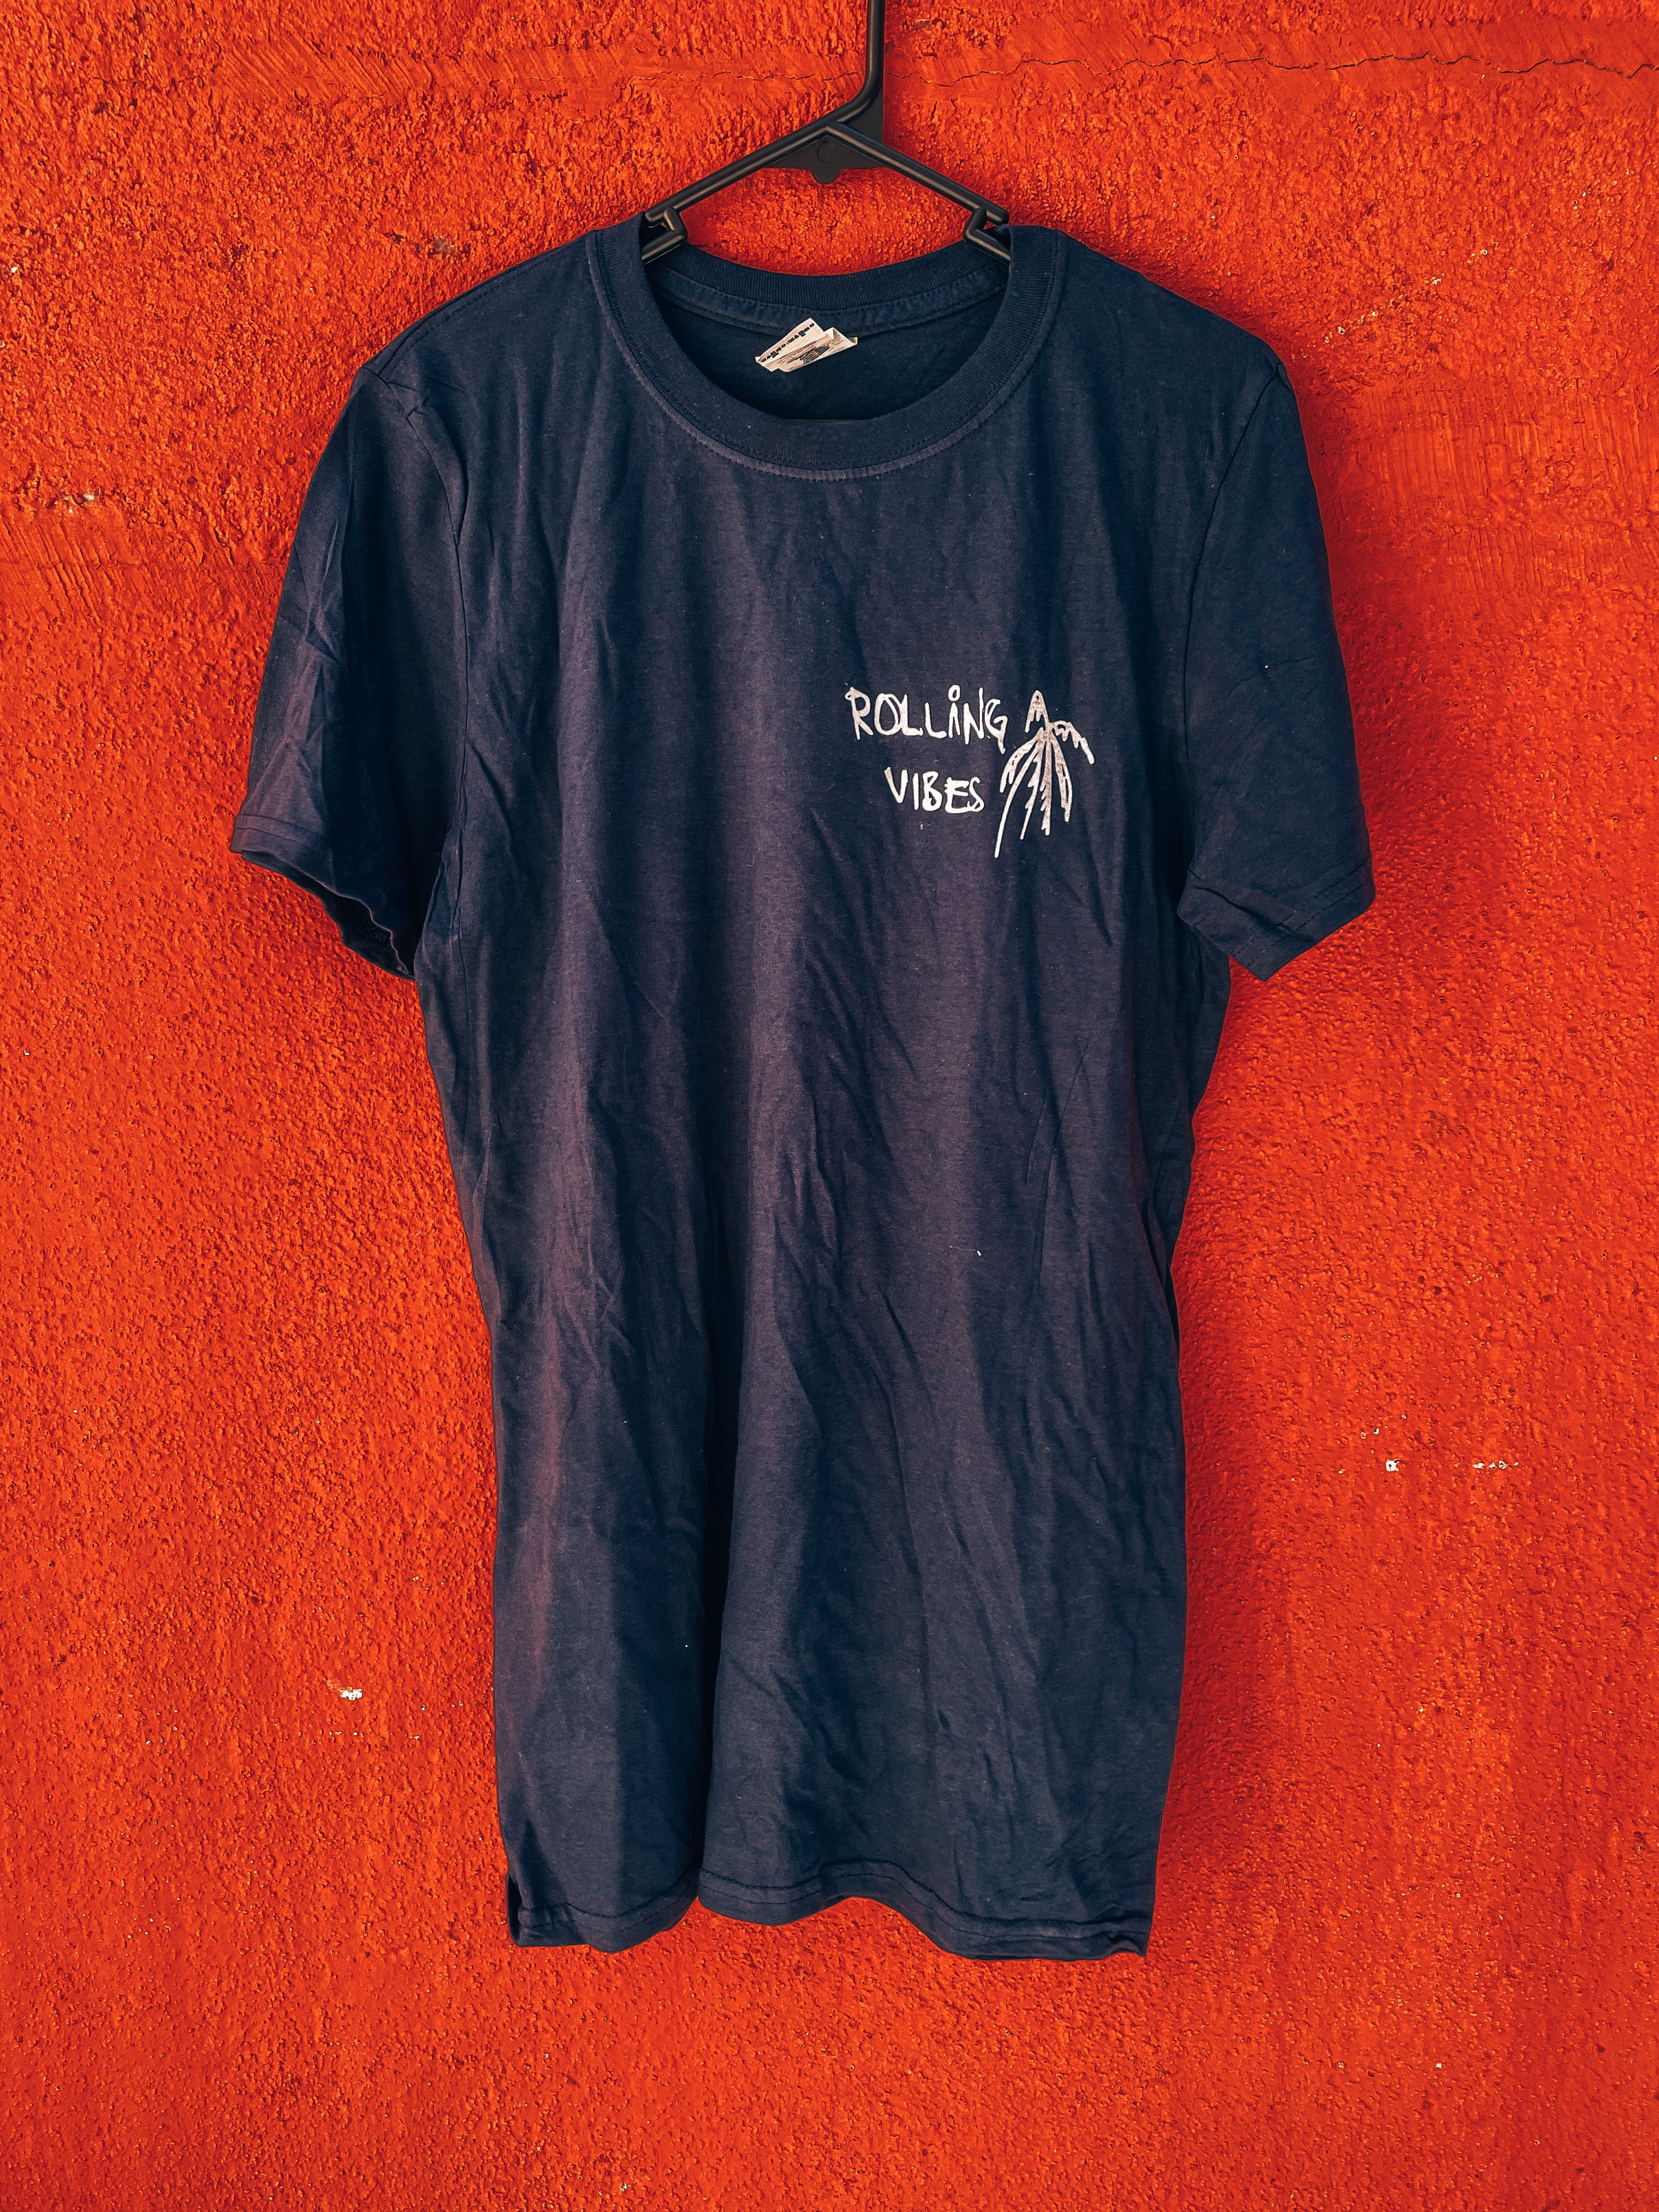 Rolling Vibes Spring T-Shirt in Navy Blue with the Rolling Vibes Logo. 100% cotton, unisex, casual beach vibe clothing perfect for spring. Feel the flow and energy of the season with this shirt. Get yours now and arise in style.